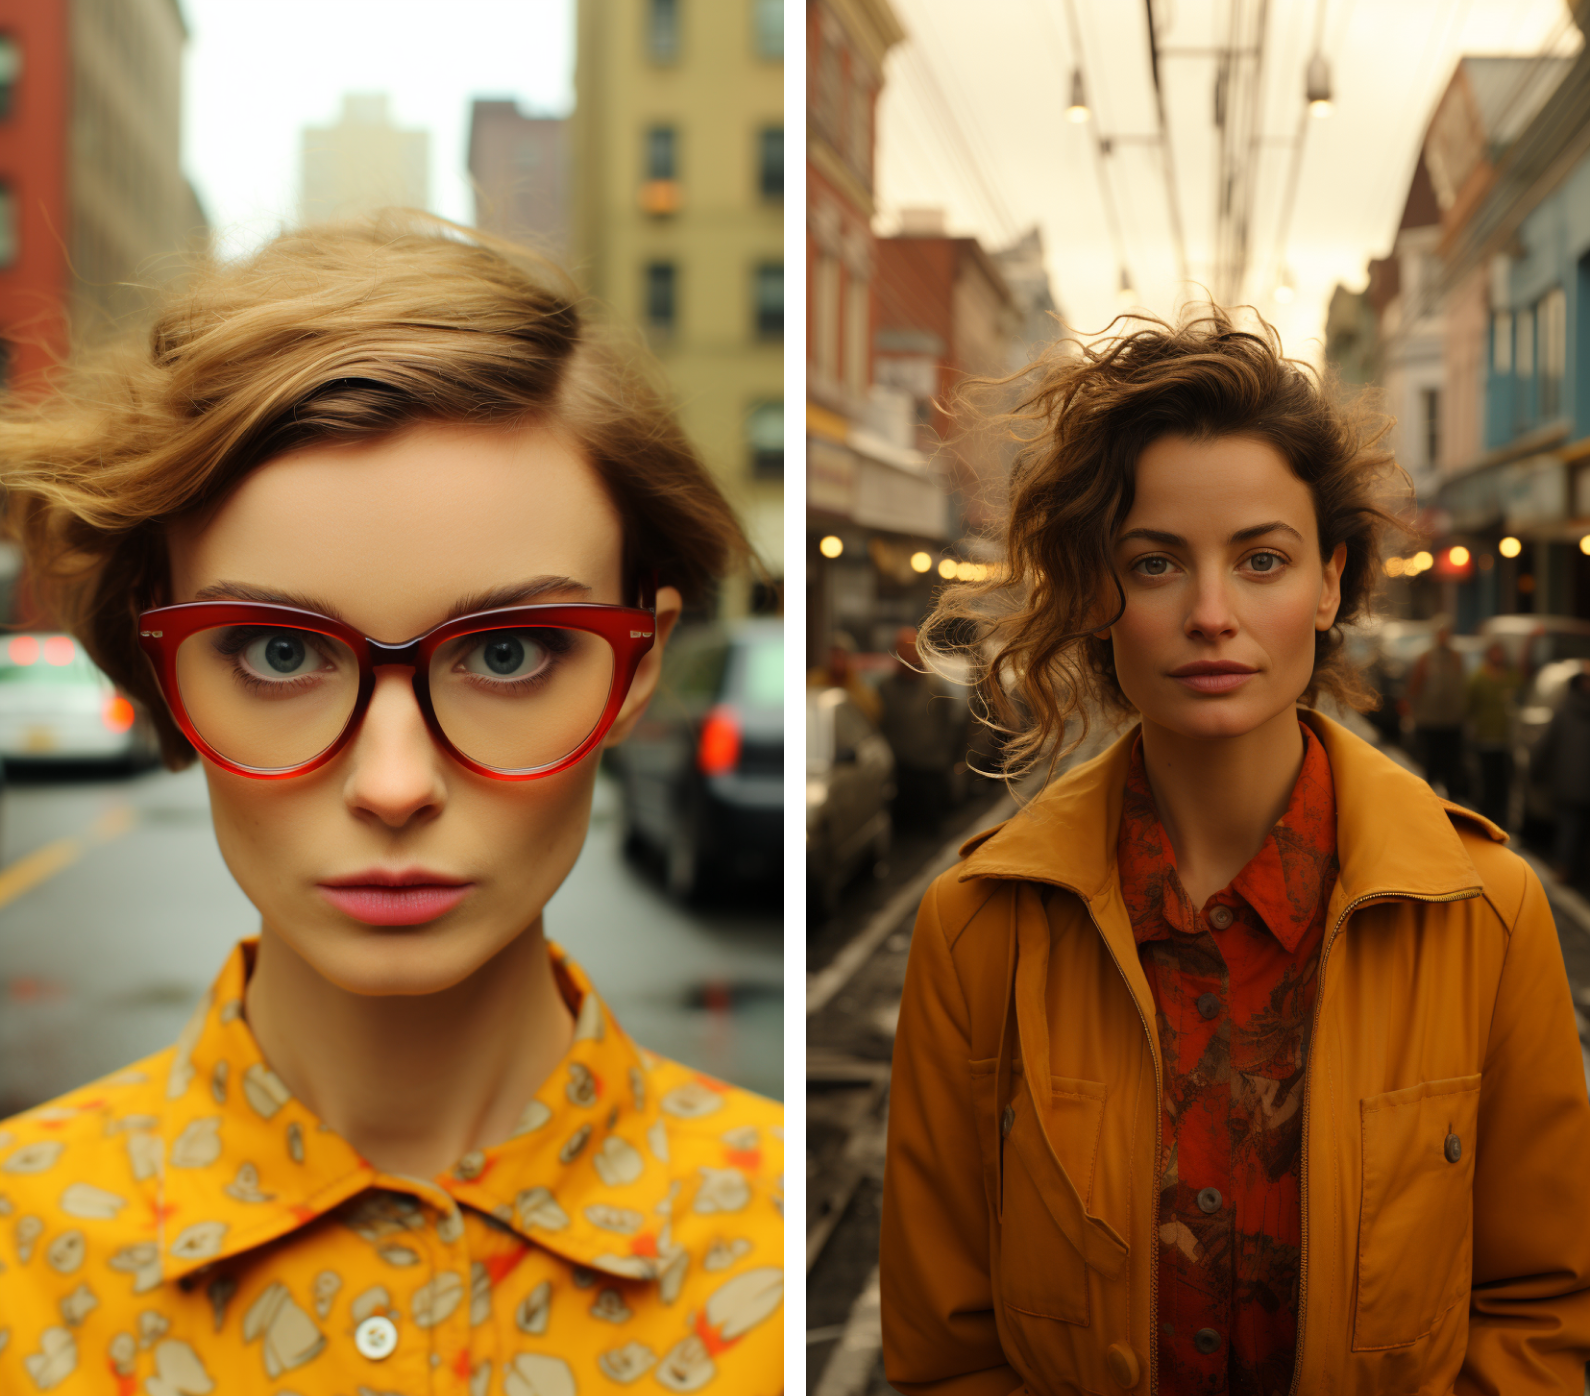 Two women, surrounded by a hectic urban environment during midday, gold, orange and yellow tones